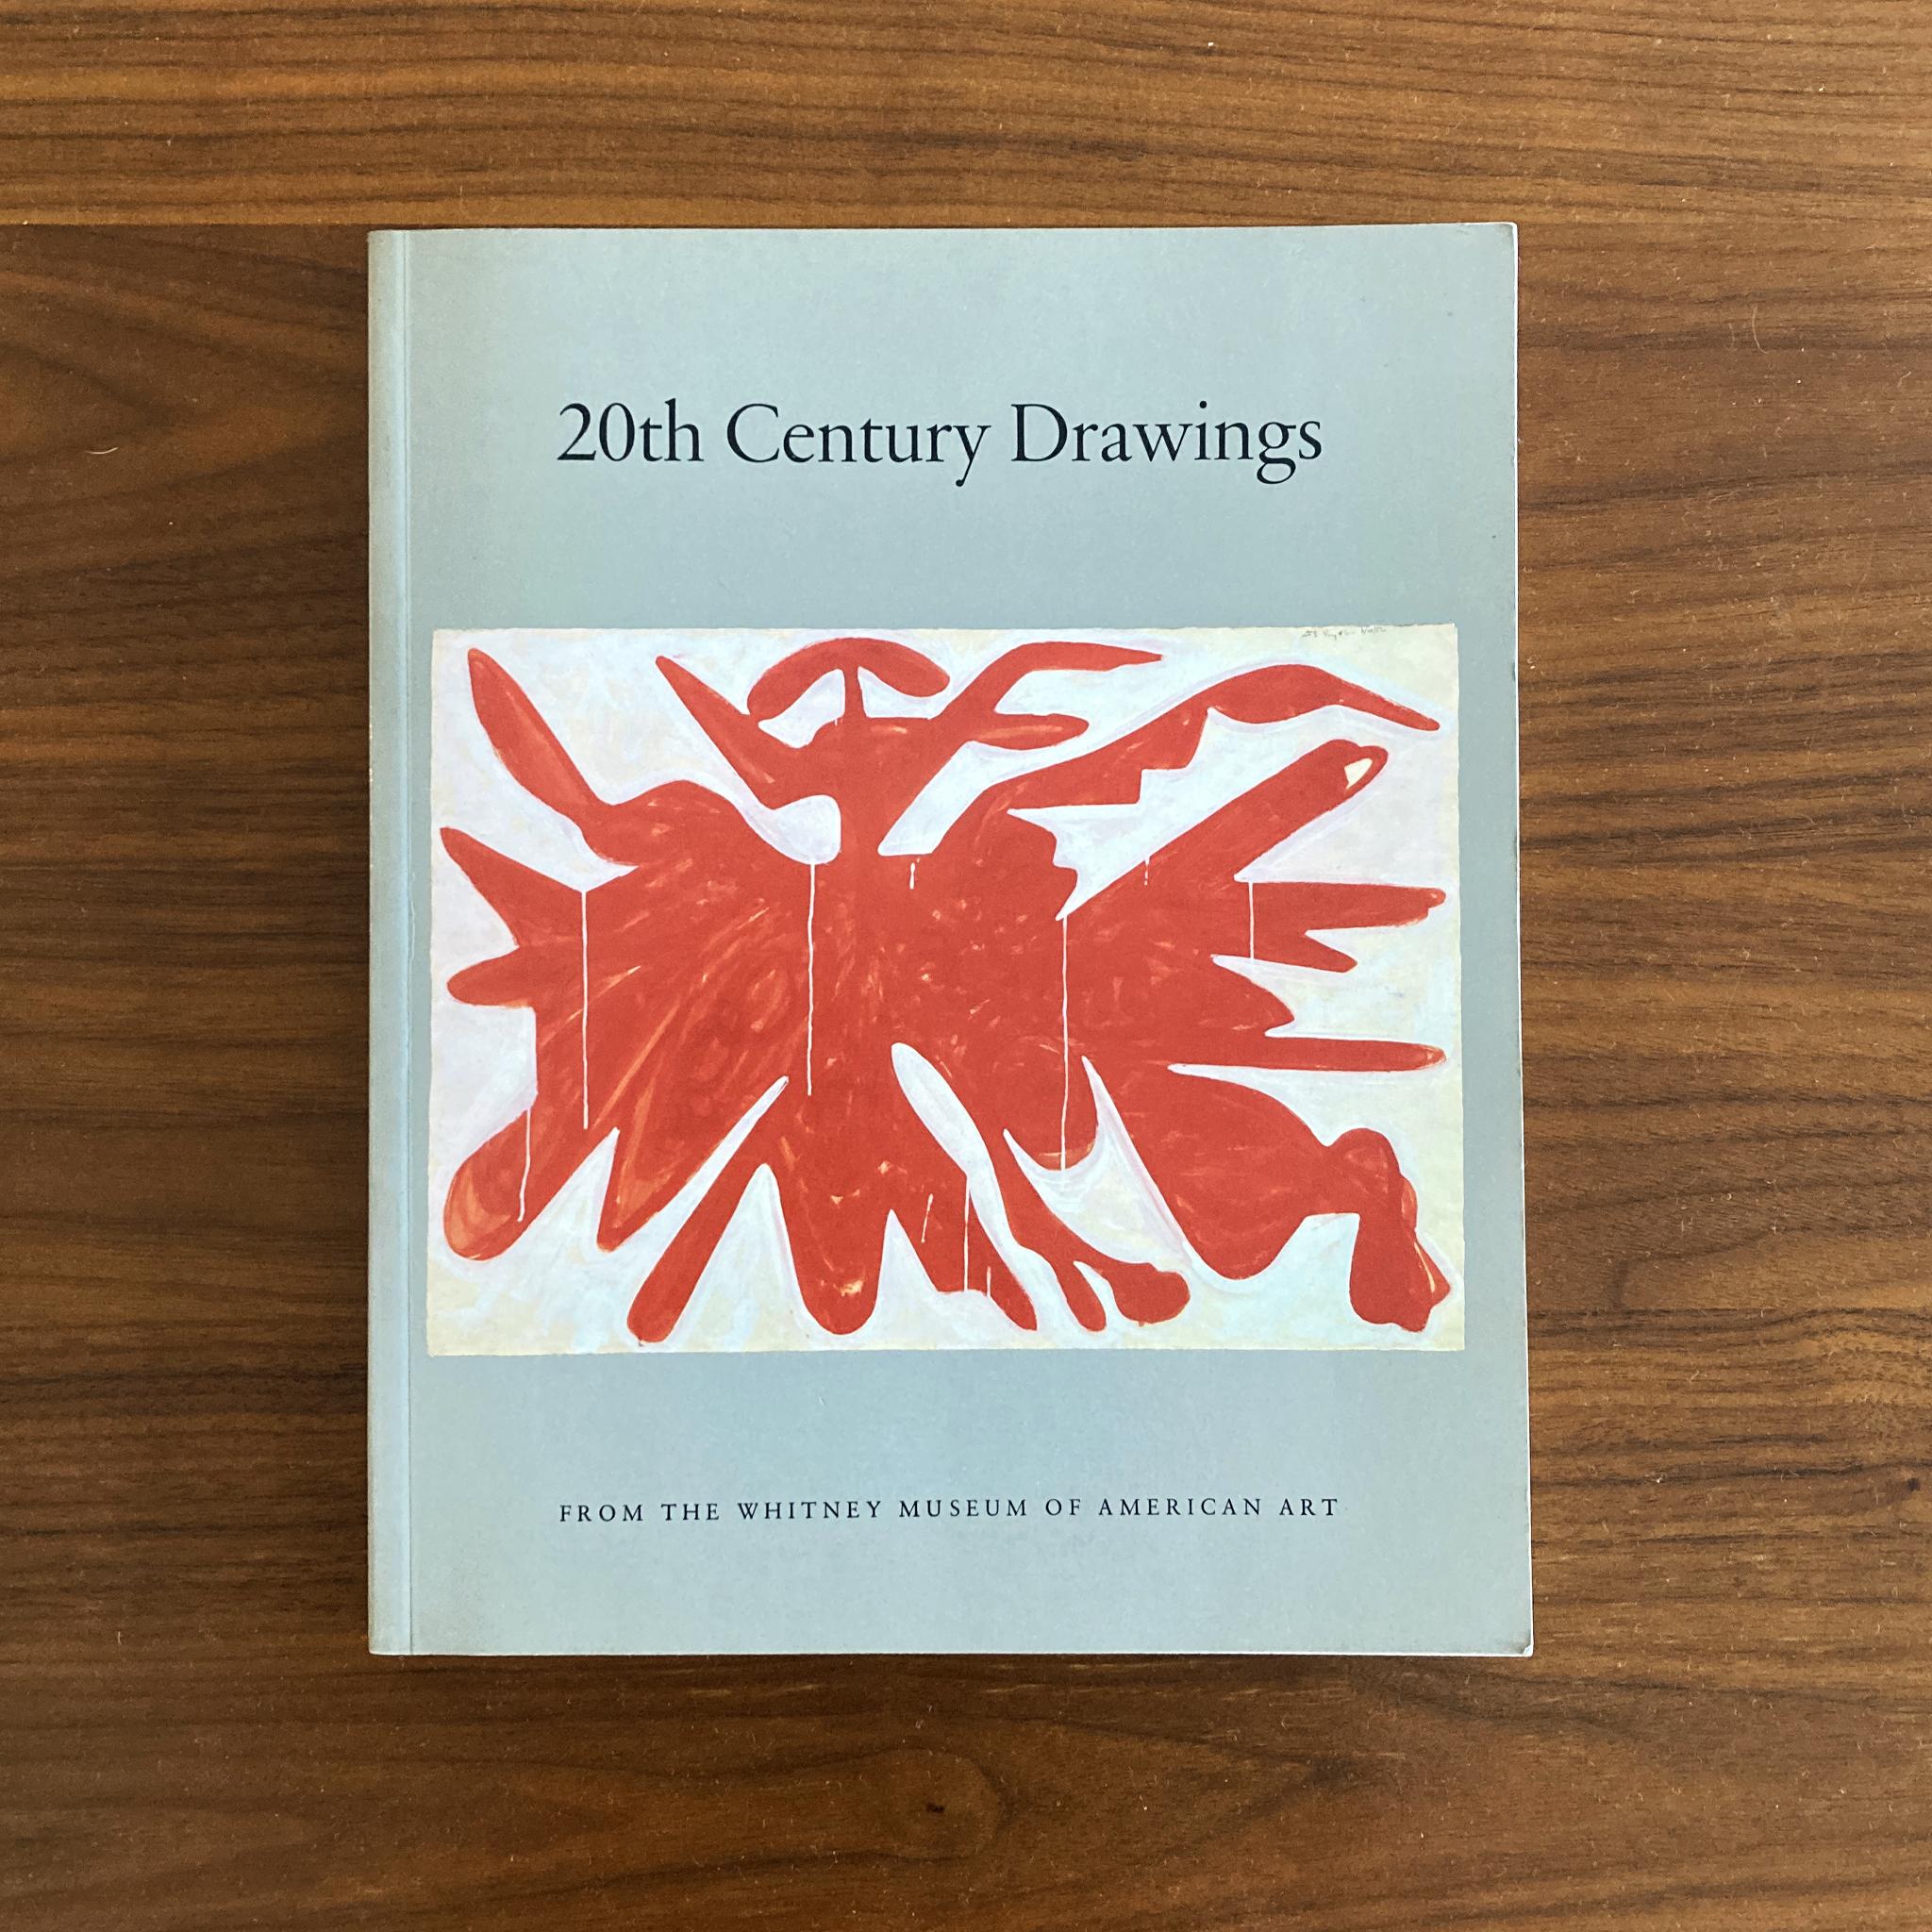 Exhibition book from the Whitney, 20th century drawings. Works by prominent 20th Century American artists, with descriptive text including.: Thomas Hart Benton, Elie Nadelman, Earle Horter, Theodore Roszak, and Roy Lichtenstein among many others. An